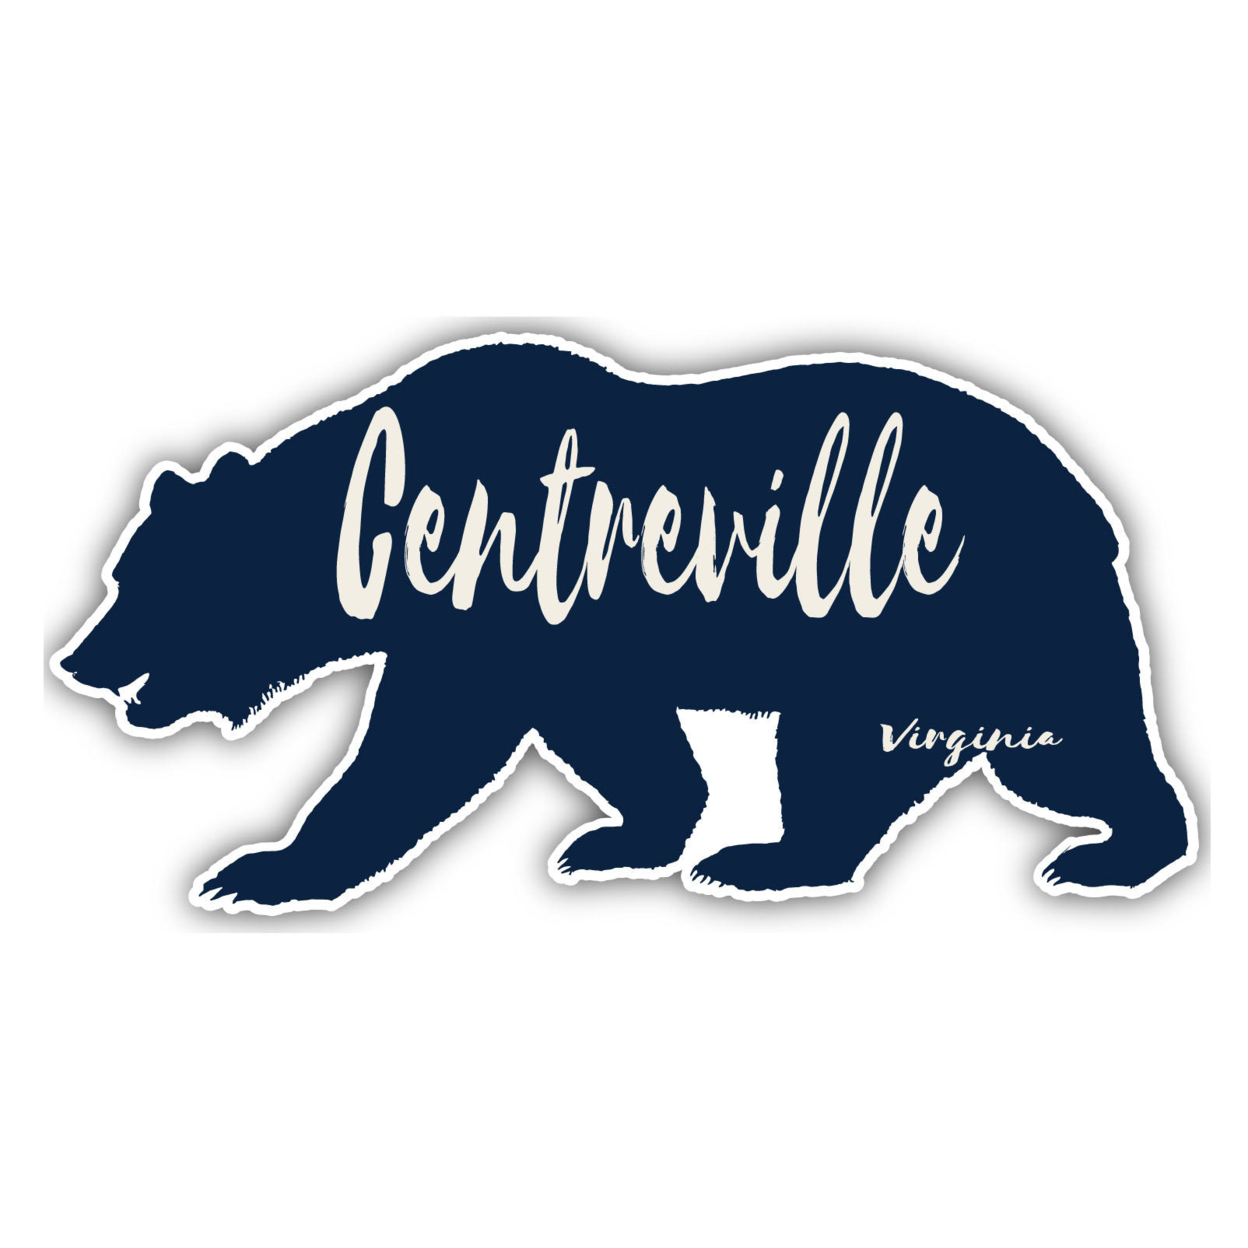 Centreville Virginia Souvenir Decorative Stickers (Choose Theme And Size) - 4-Pack, 10-Inch, Bear